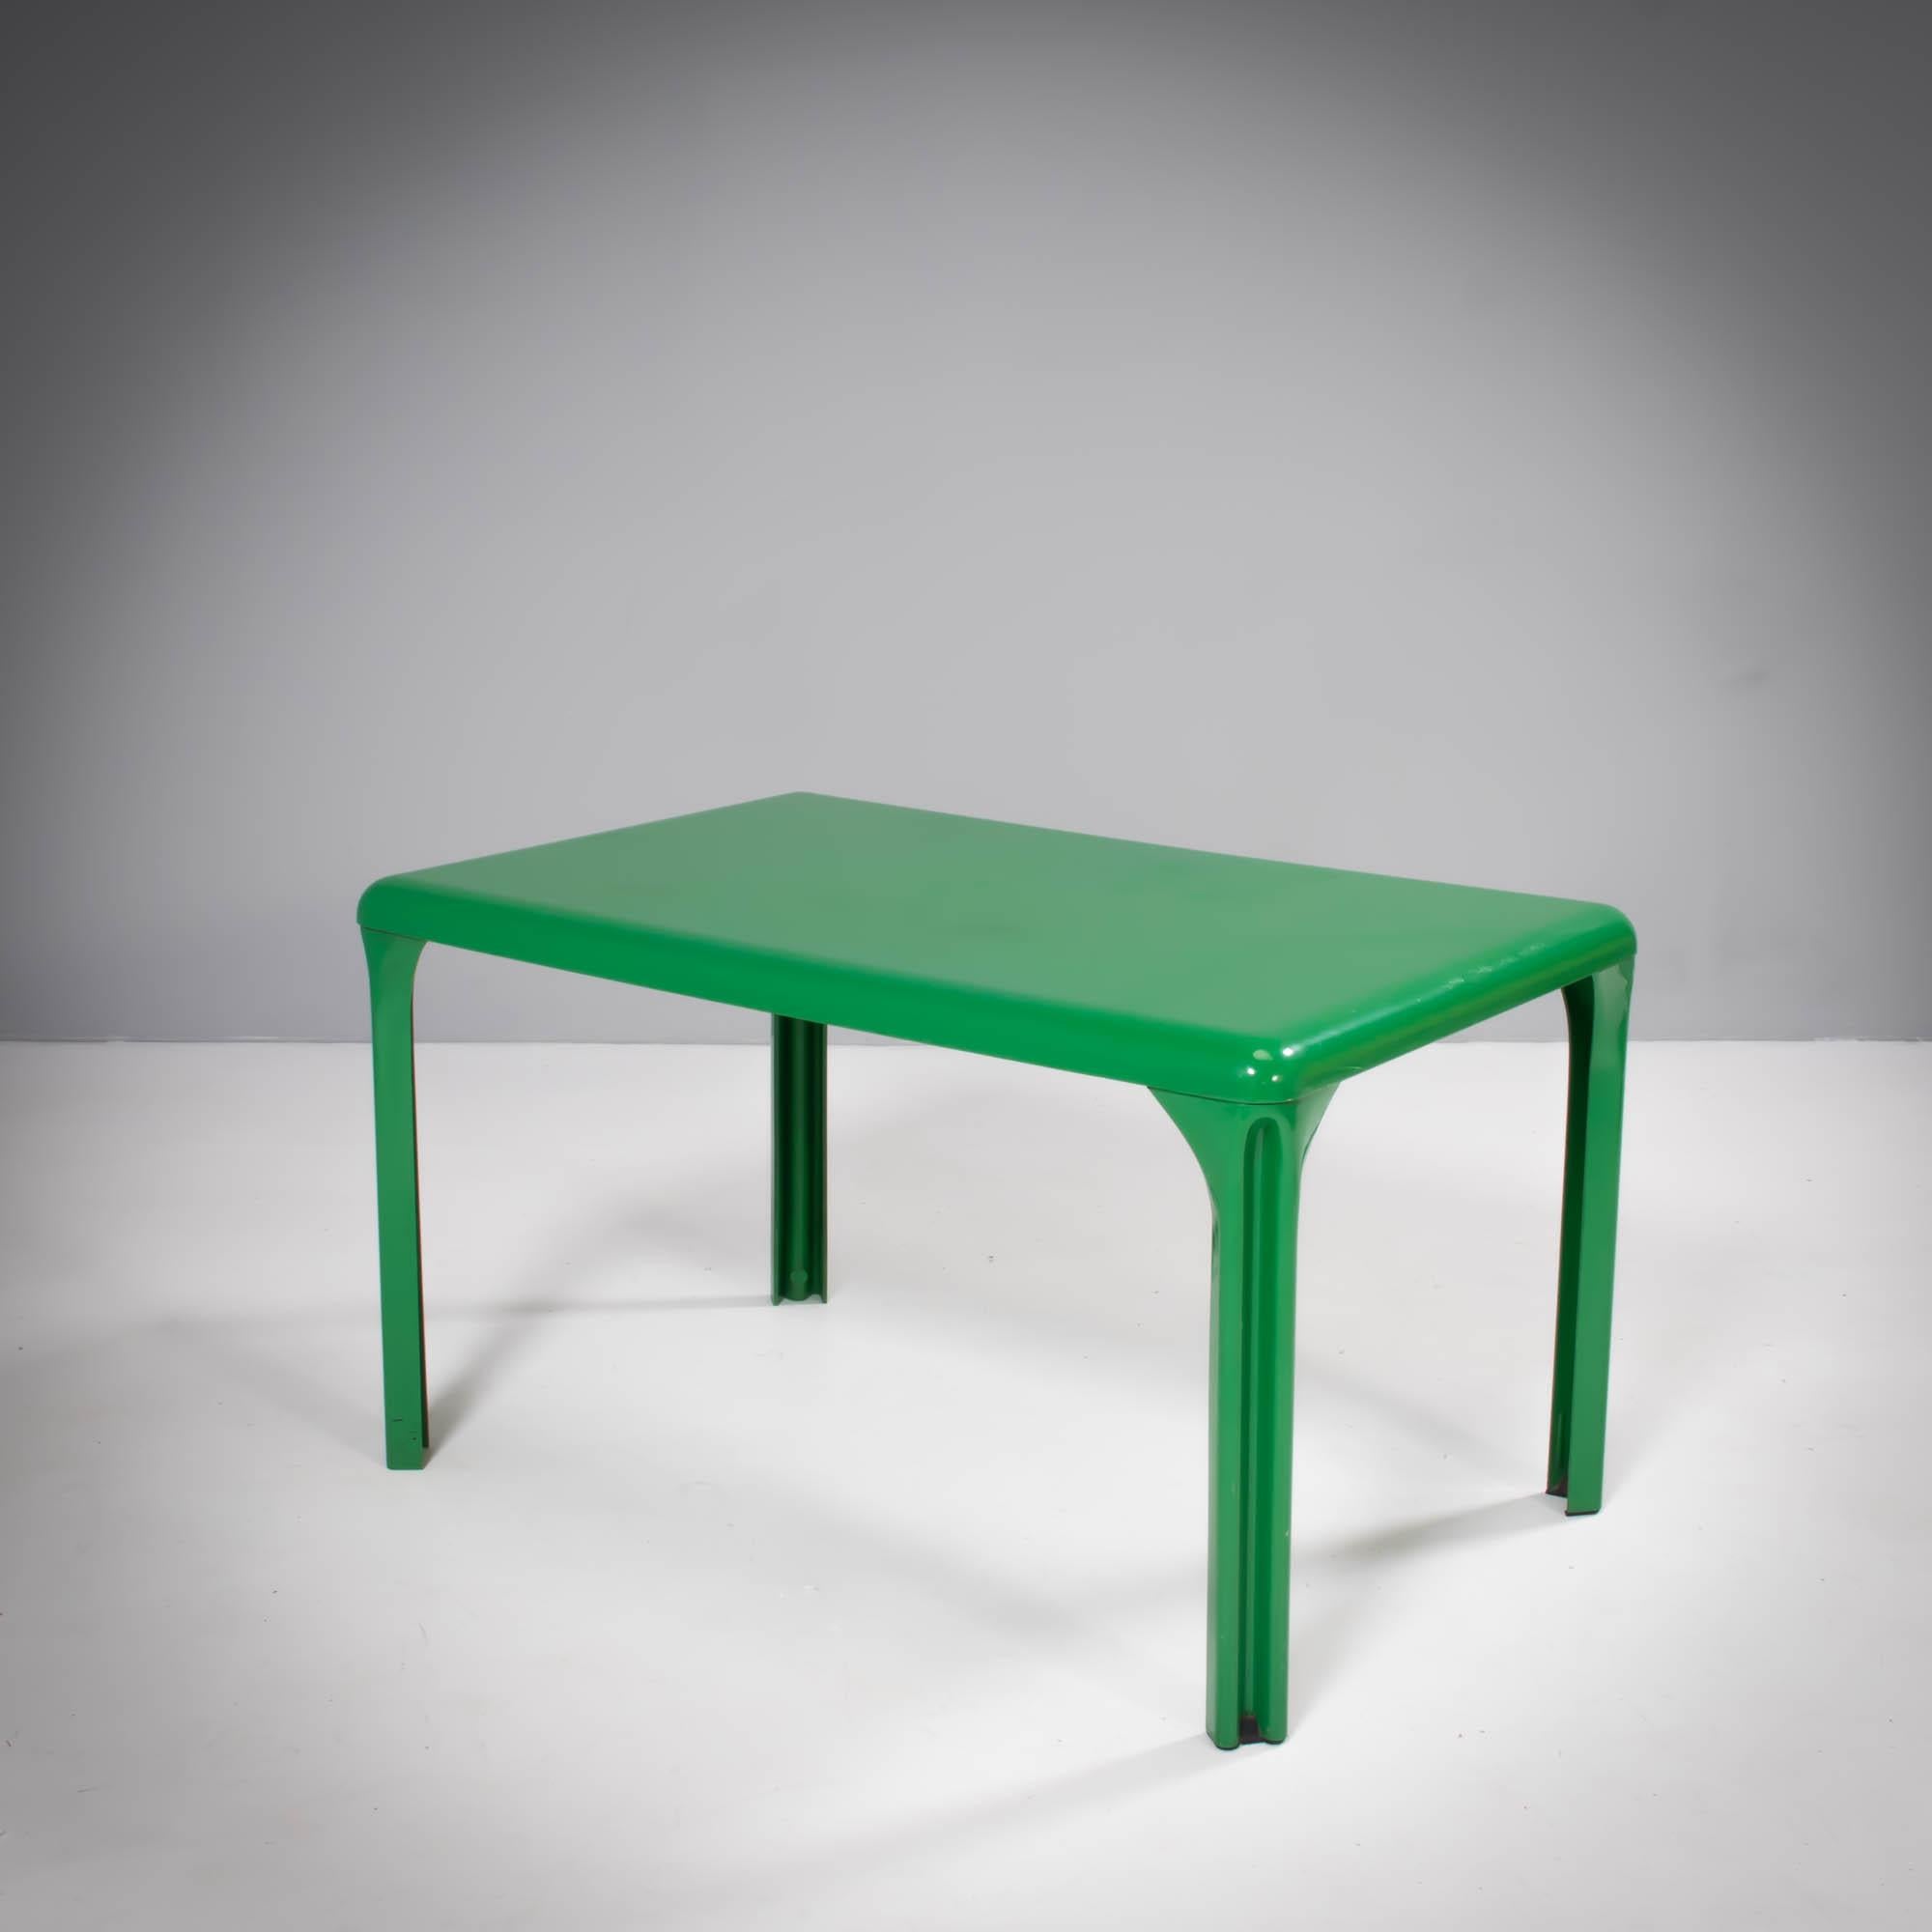 Originally designed by Vico Magistretti in 1970 and manufactured by Artemide, the Stadio table range is a fantastic example of Italian modernist design.

Utilising the single moulding manufacturing process that was becoming popular at the time,